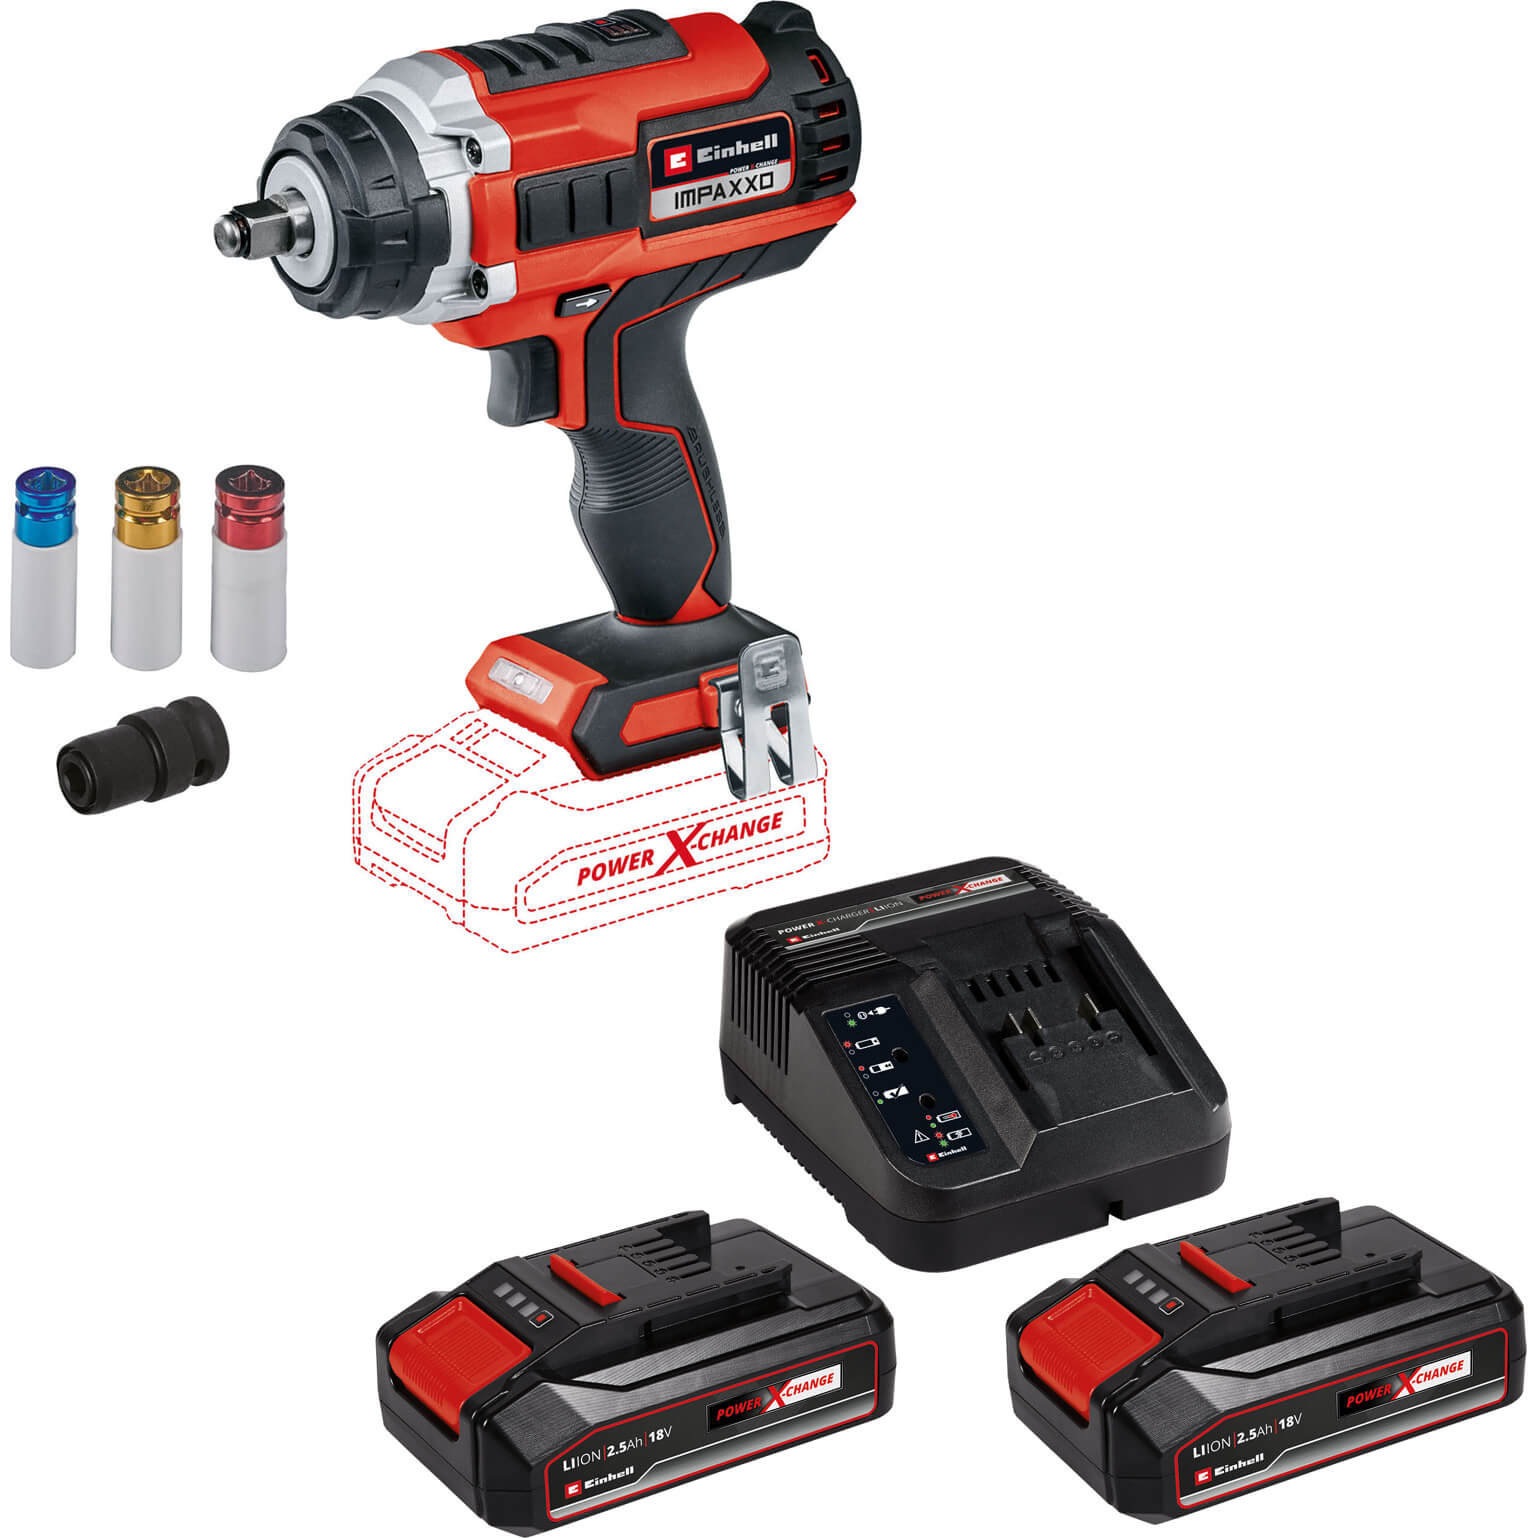 Image of Einhell IMPAXXO 18/400 18v Cordless Brushless 1/2" Impact Wrench 2 x 2.5ah Li-ion Charger No Case